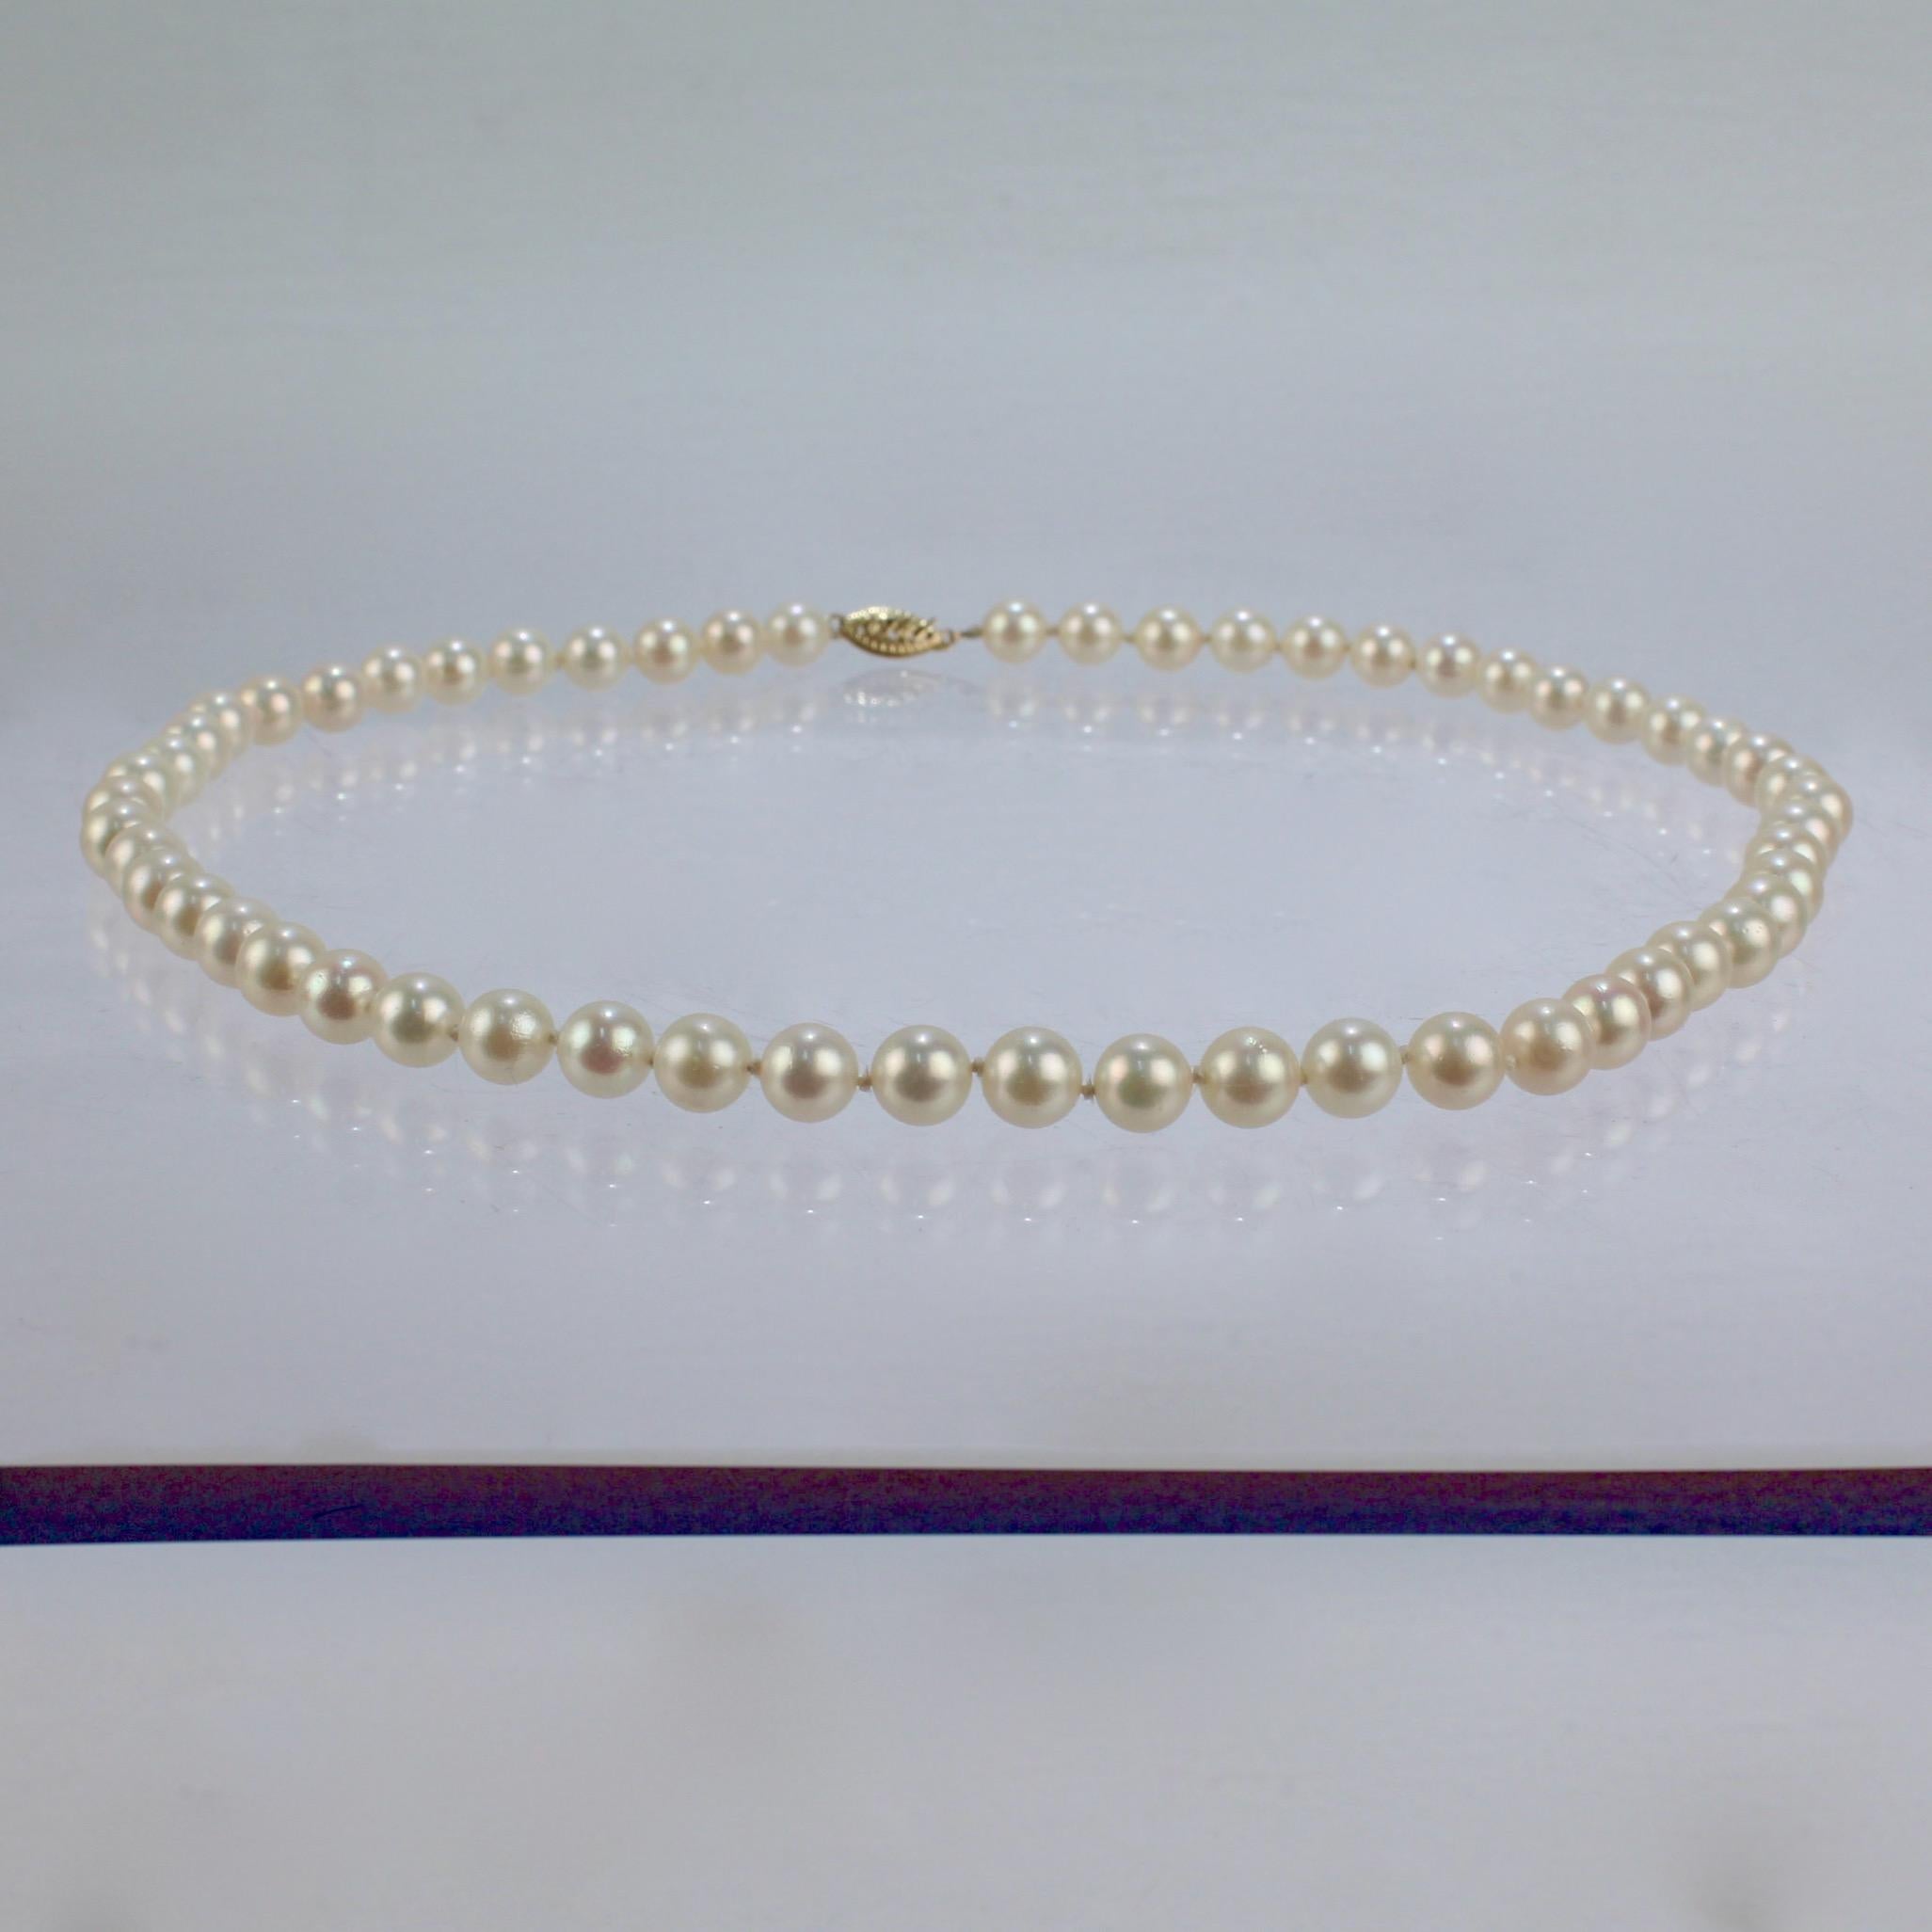 A very fine pearl strand of cultured pearls & 14k gold clasp.

With round white pearls hand-knotted on silk cord and secured with a decorative gold clasp.

Simply classic style!

Date:
20th Century

Overall Condition:
It is in overall good,